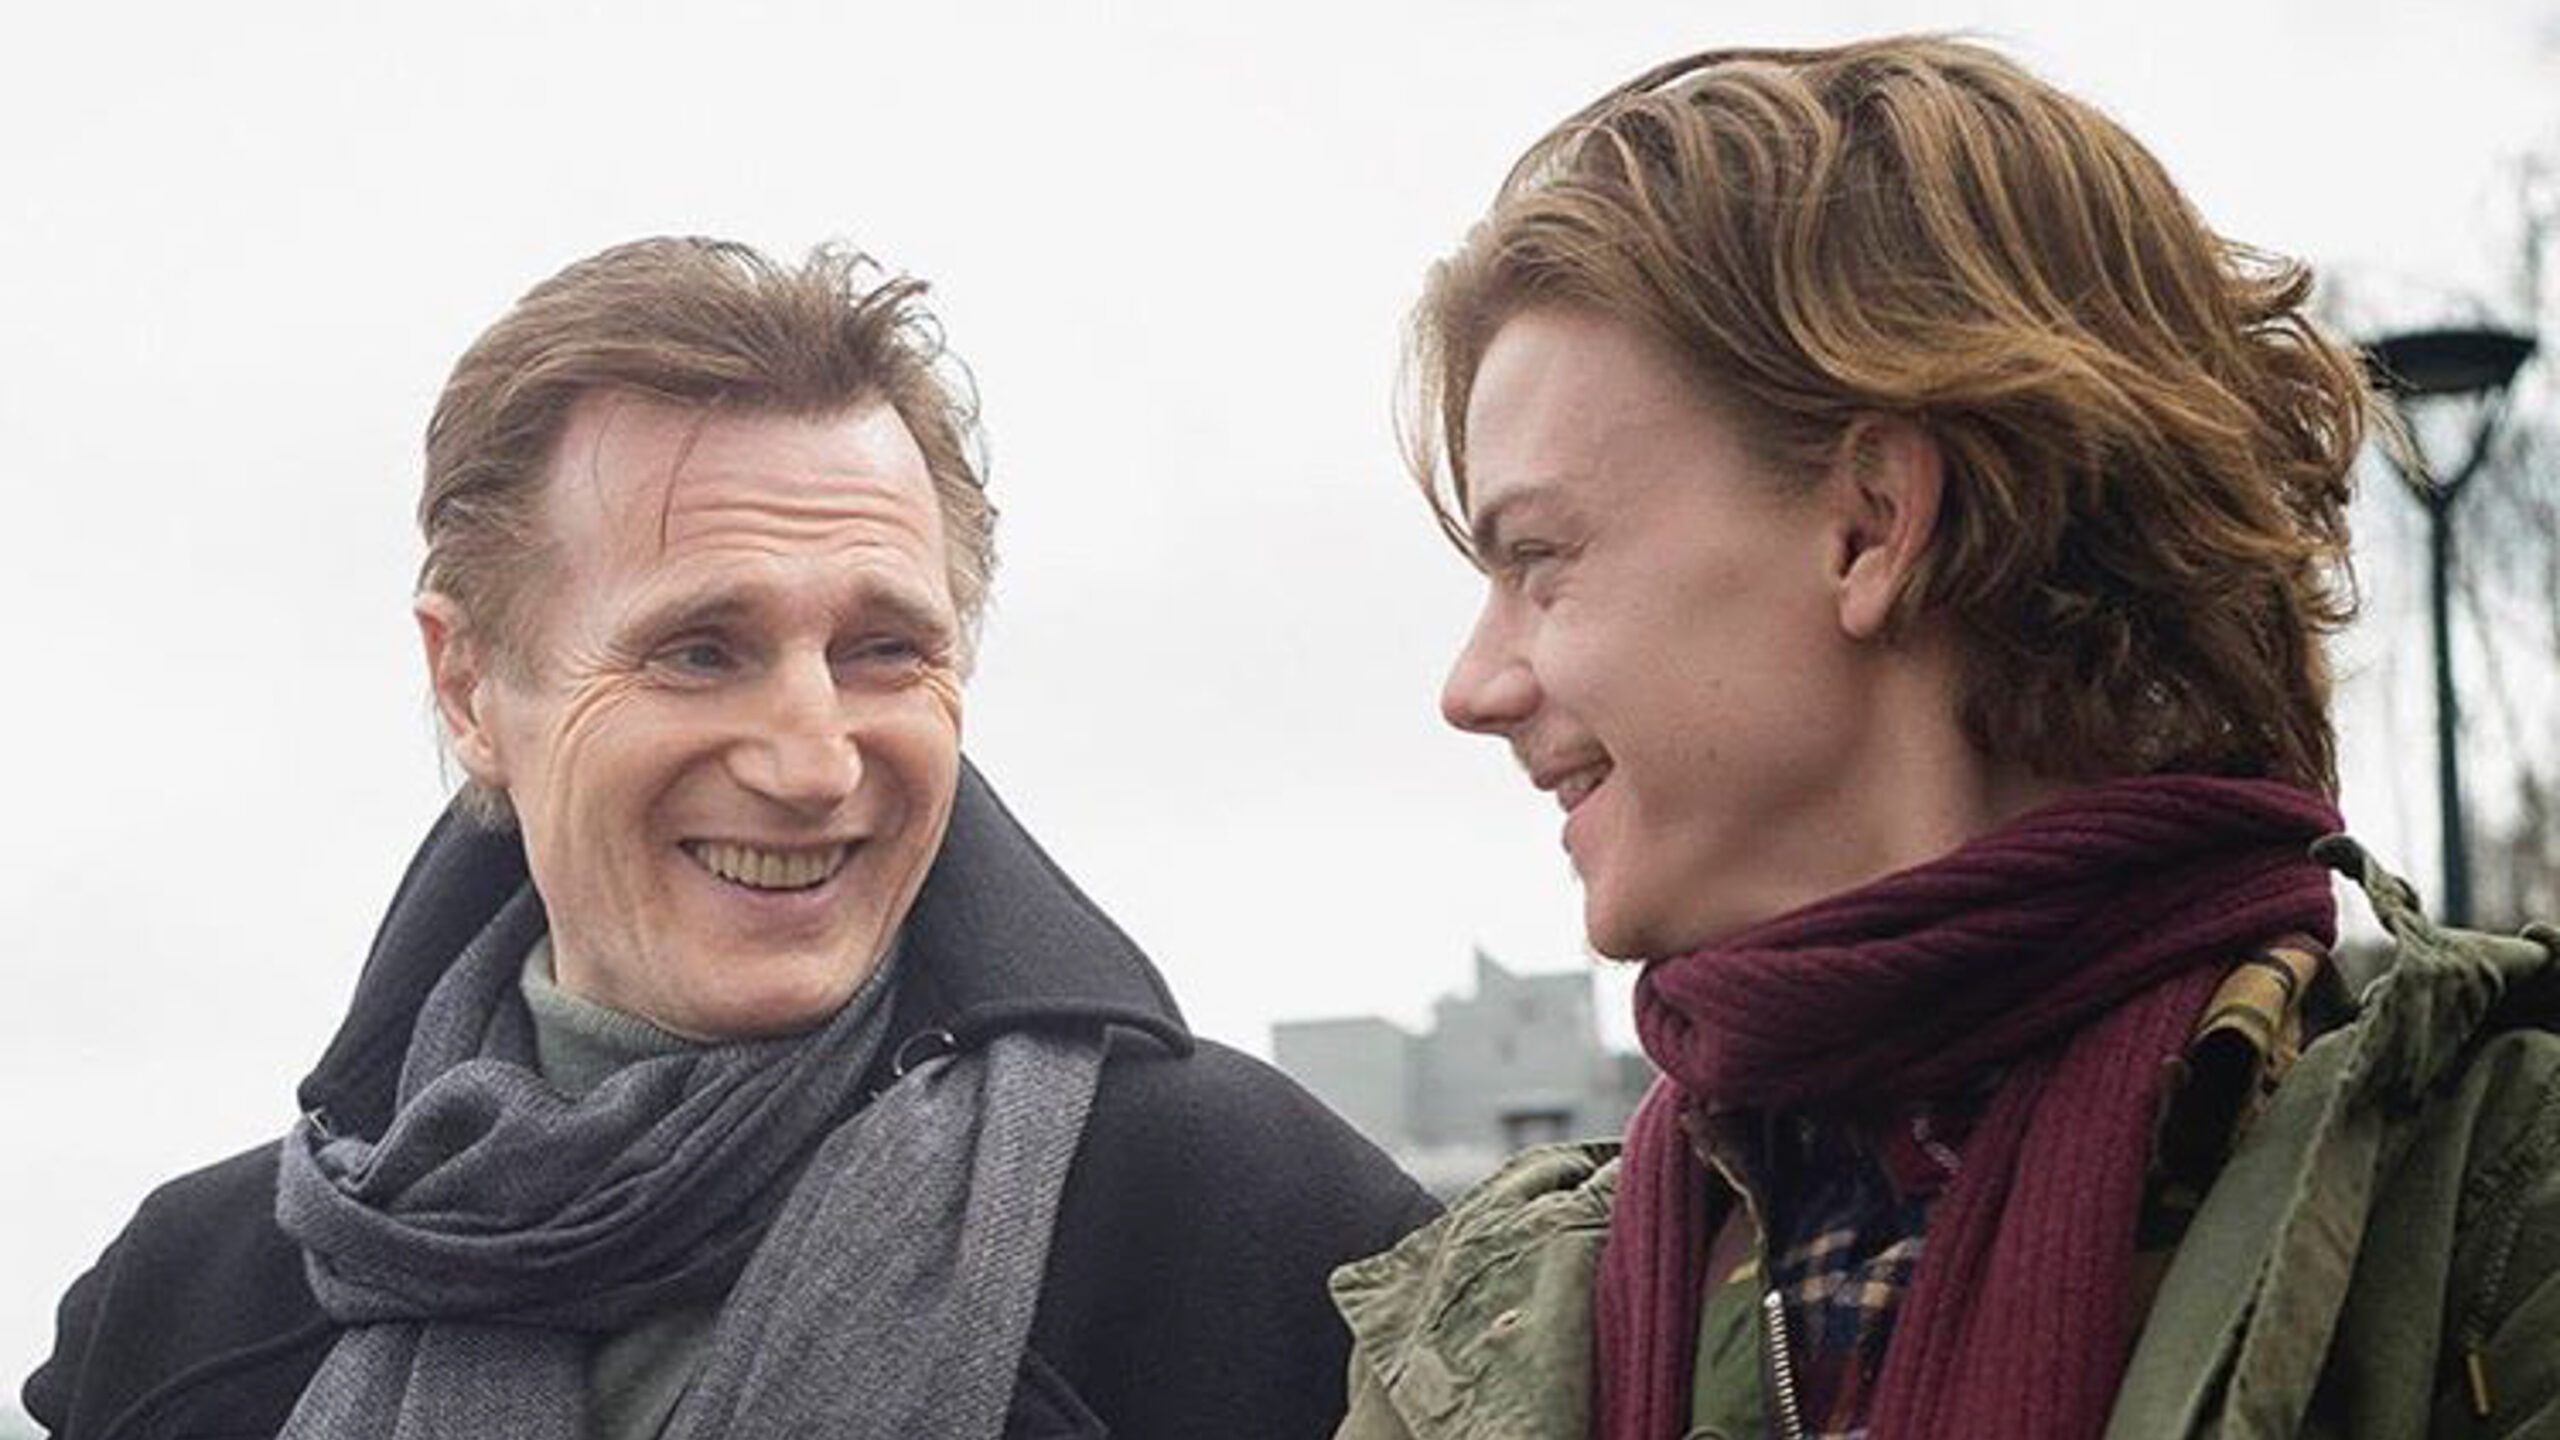 RECAP: What happens in the ‘Love Actually’ reunion